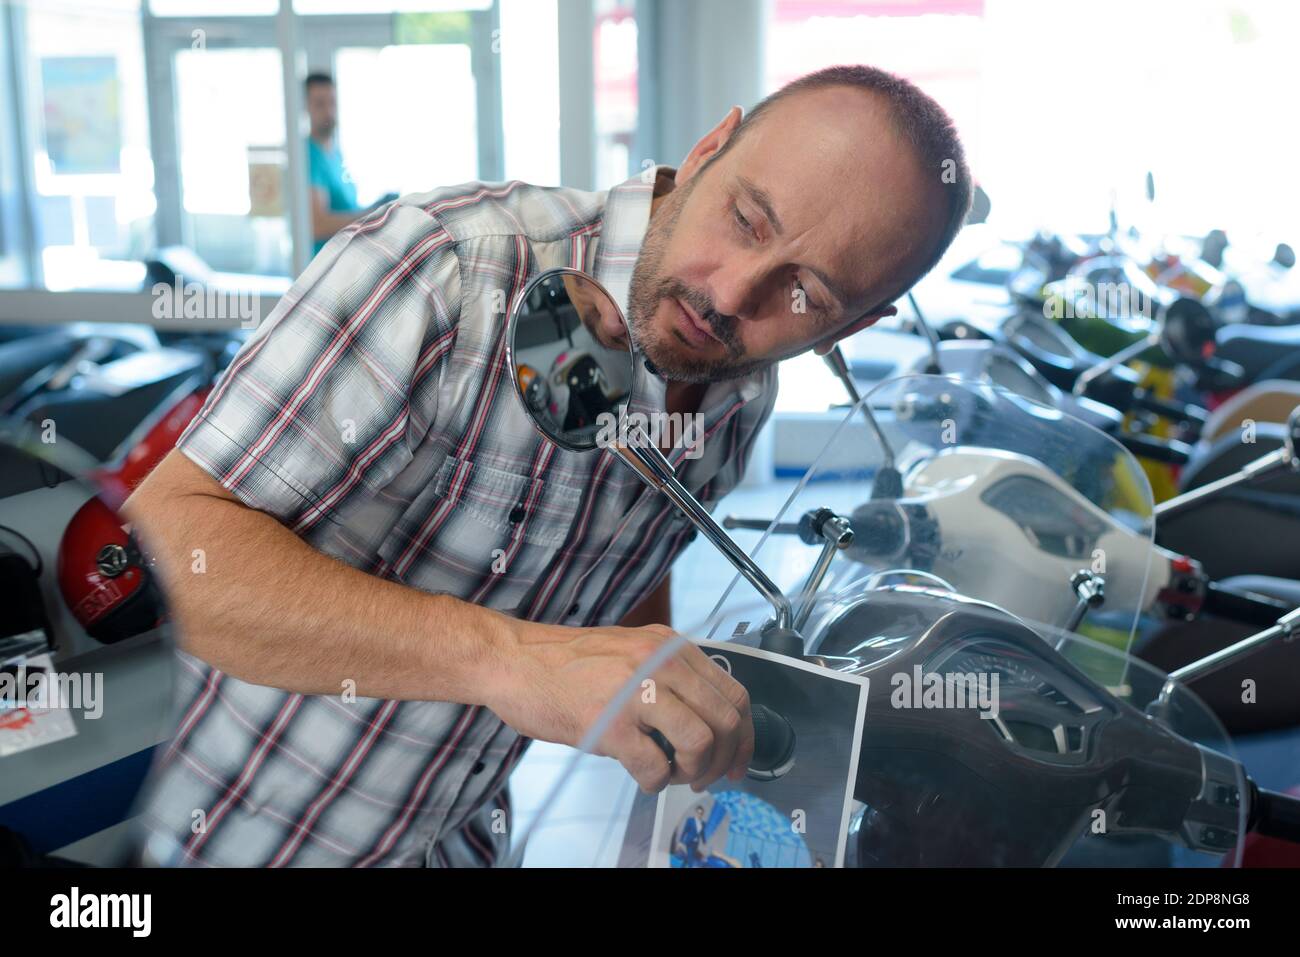 a man testing a scooter Stock Photo